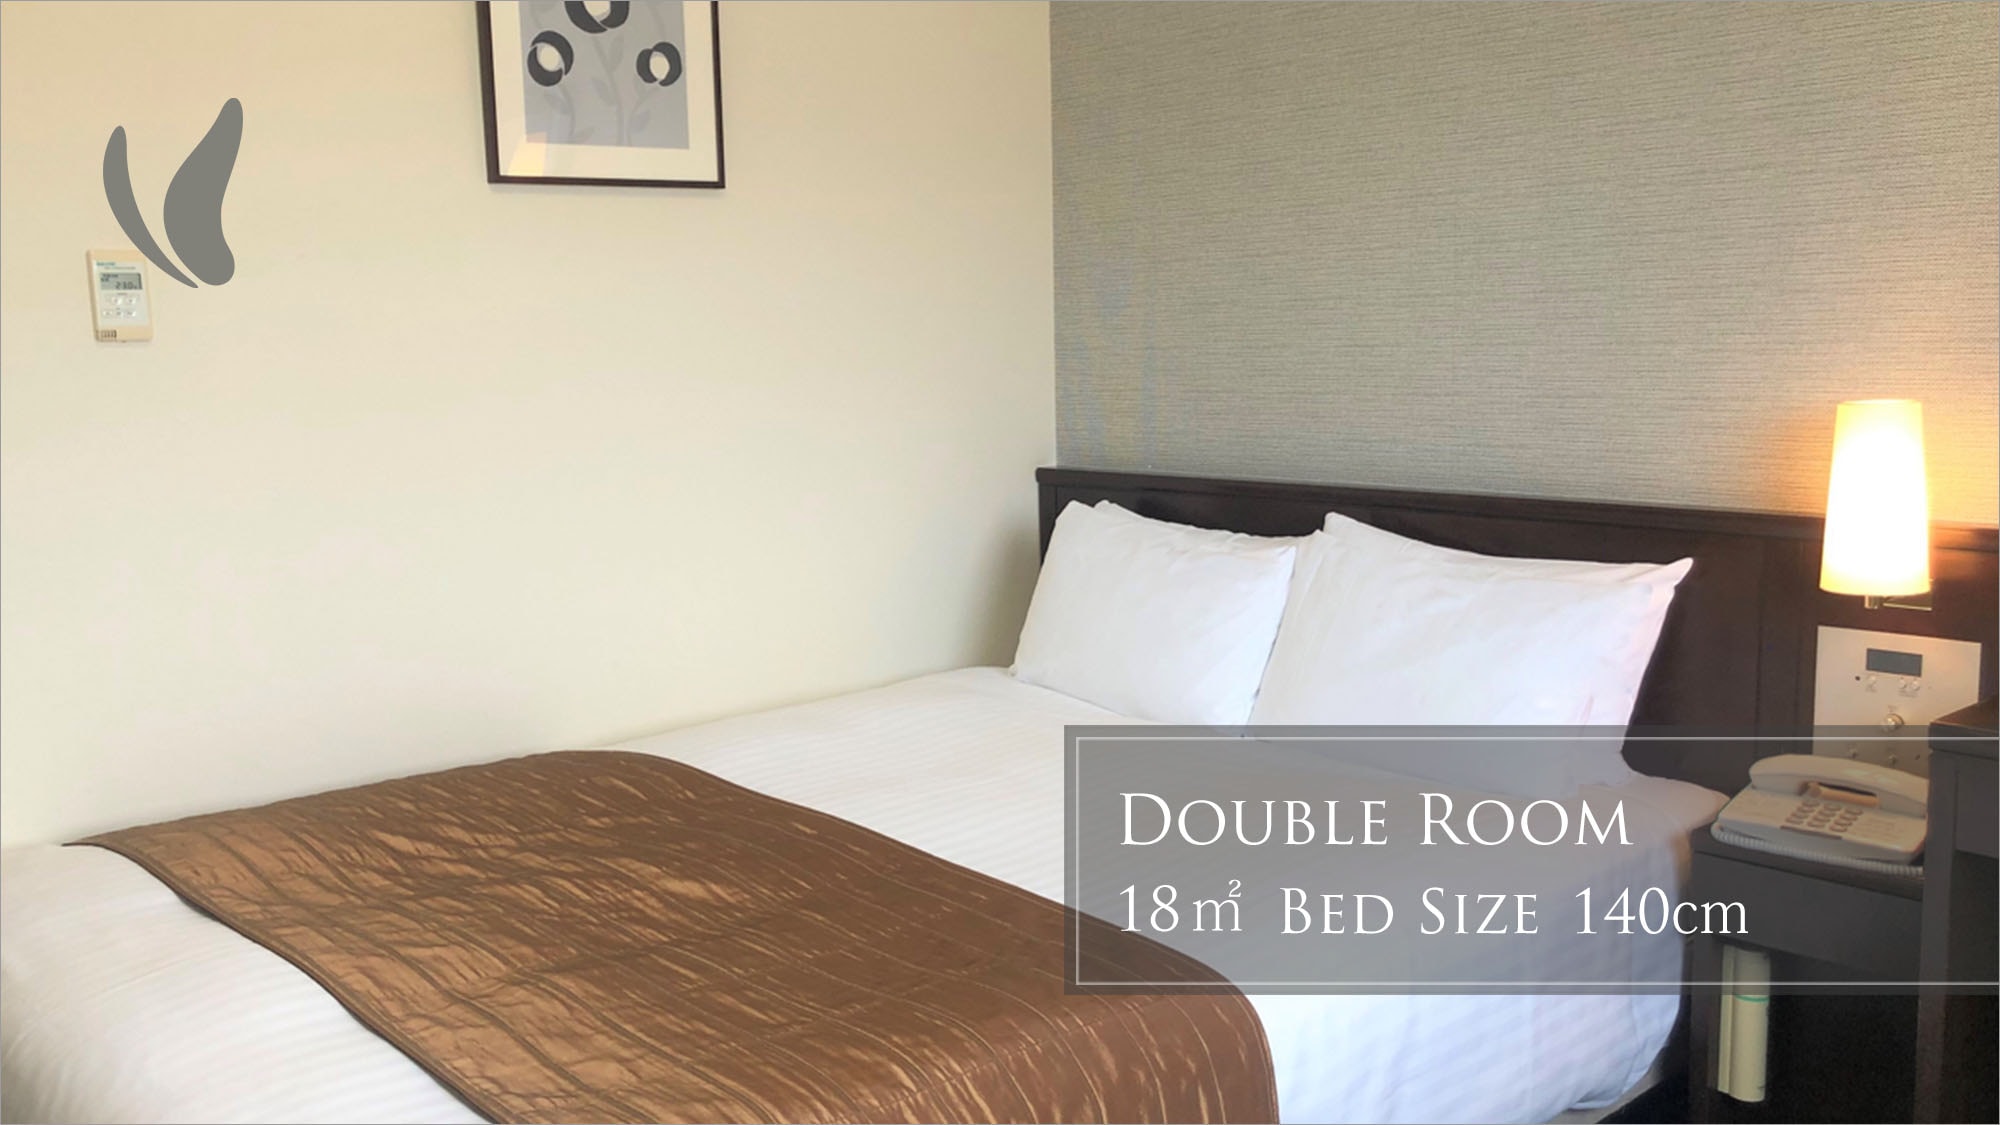  A double room